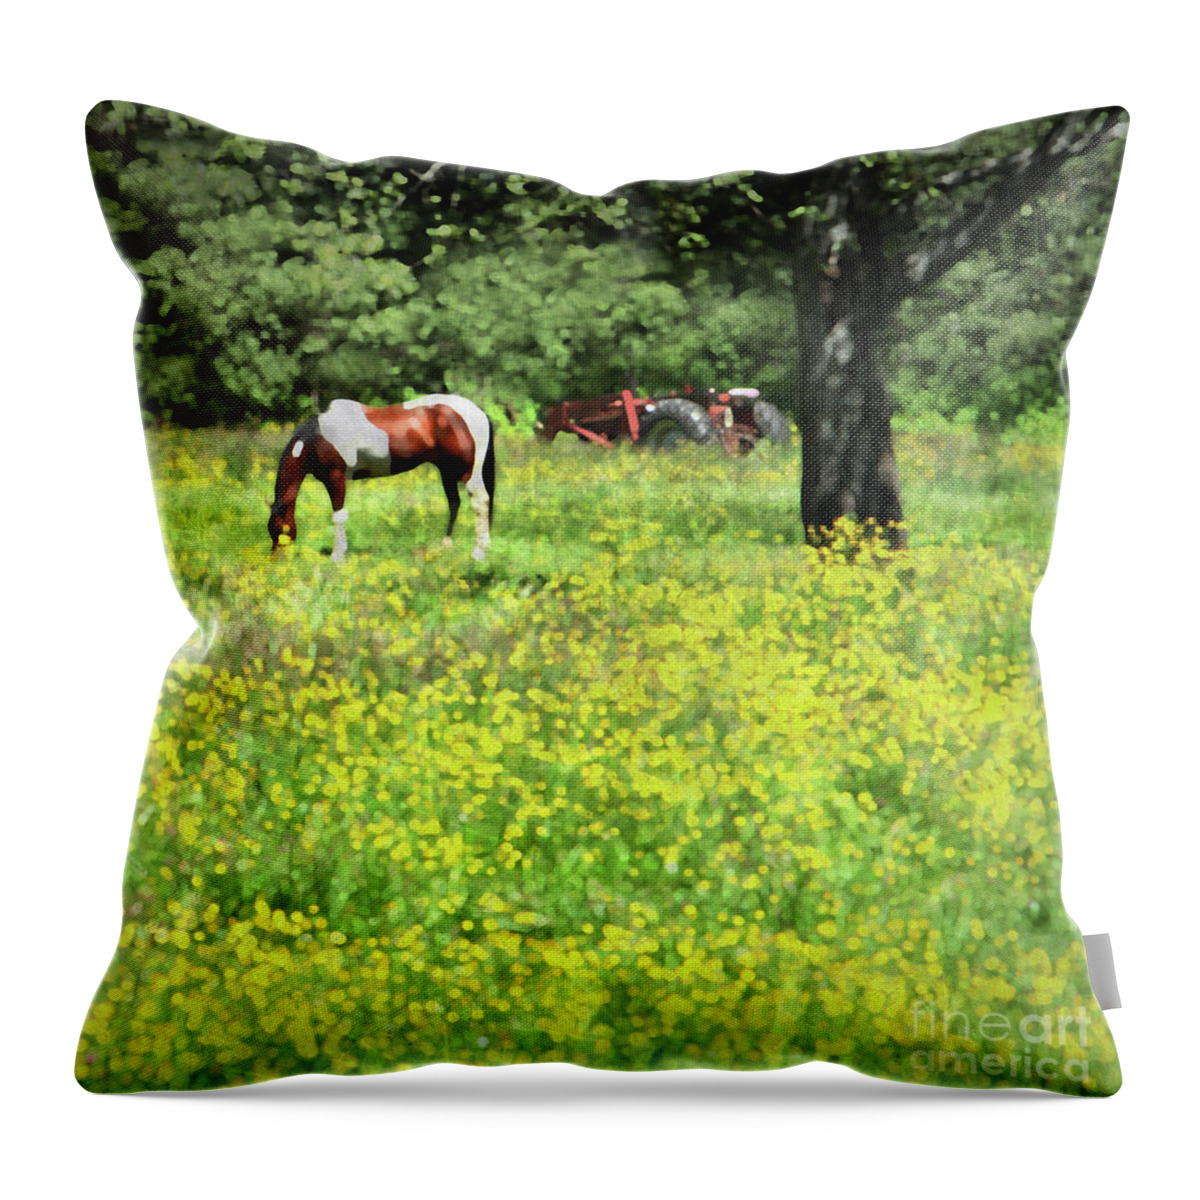 Horse Throw Pillow featuring the digital art Idyllic by Michelle Twohig